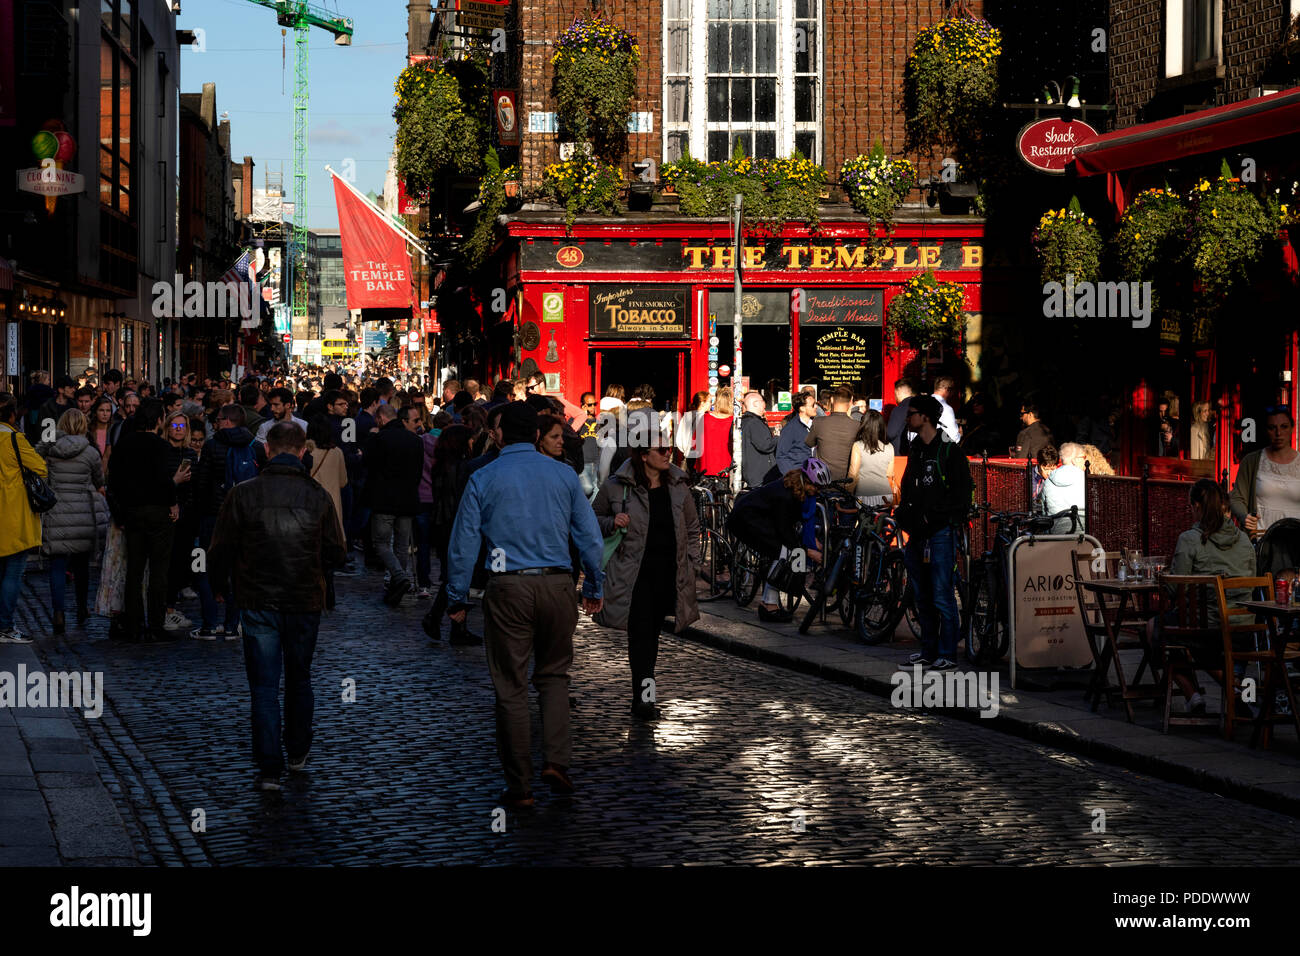 Crowds of tourists in the Temple Bar area of Dublin Stock Photo